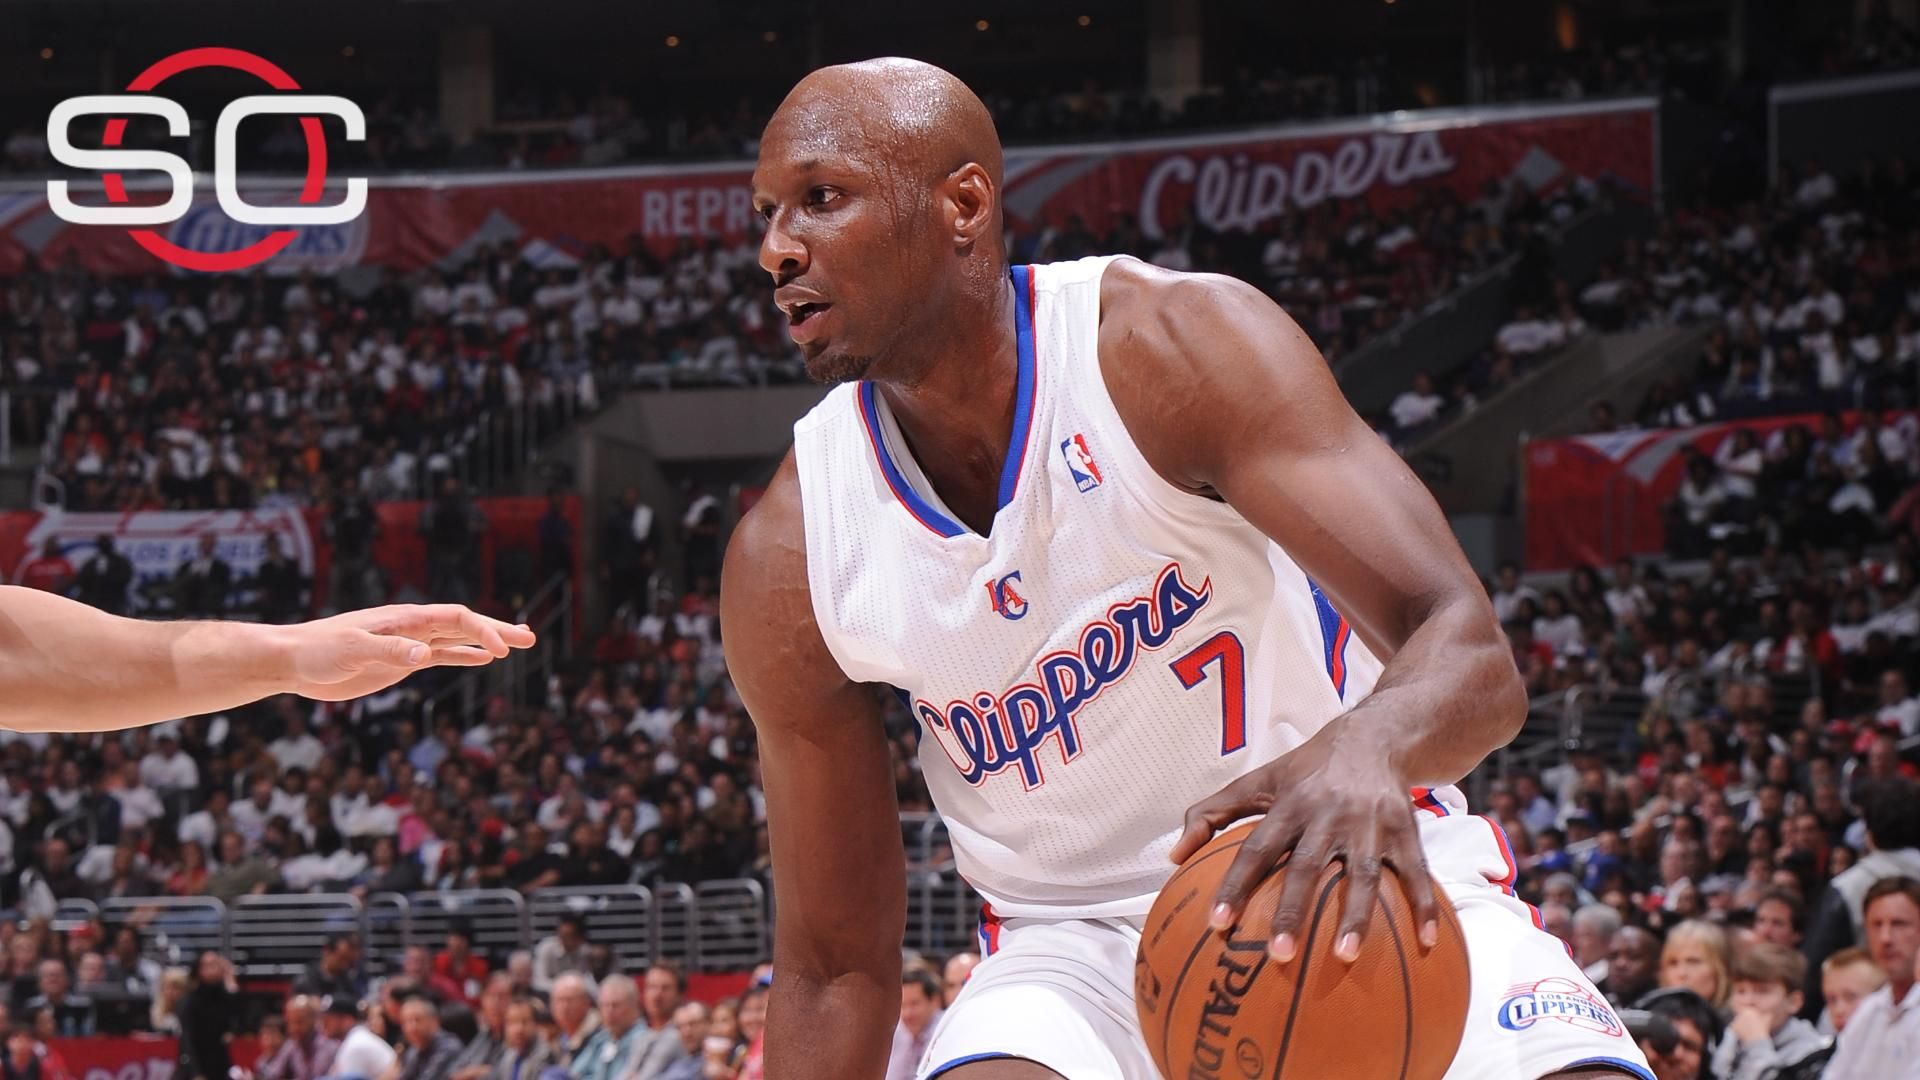 Lamar Odom showing small signs of improvement